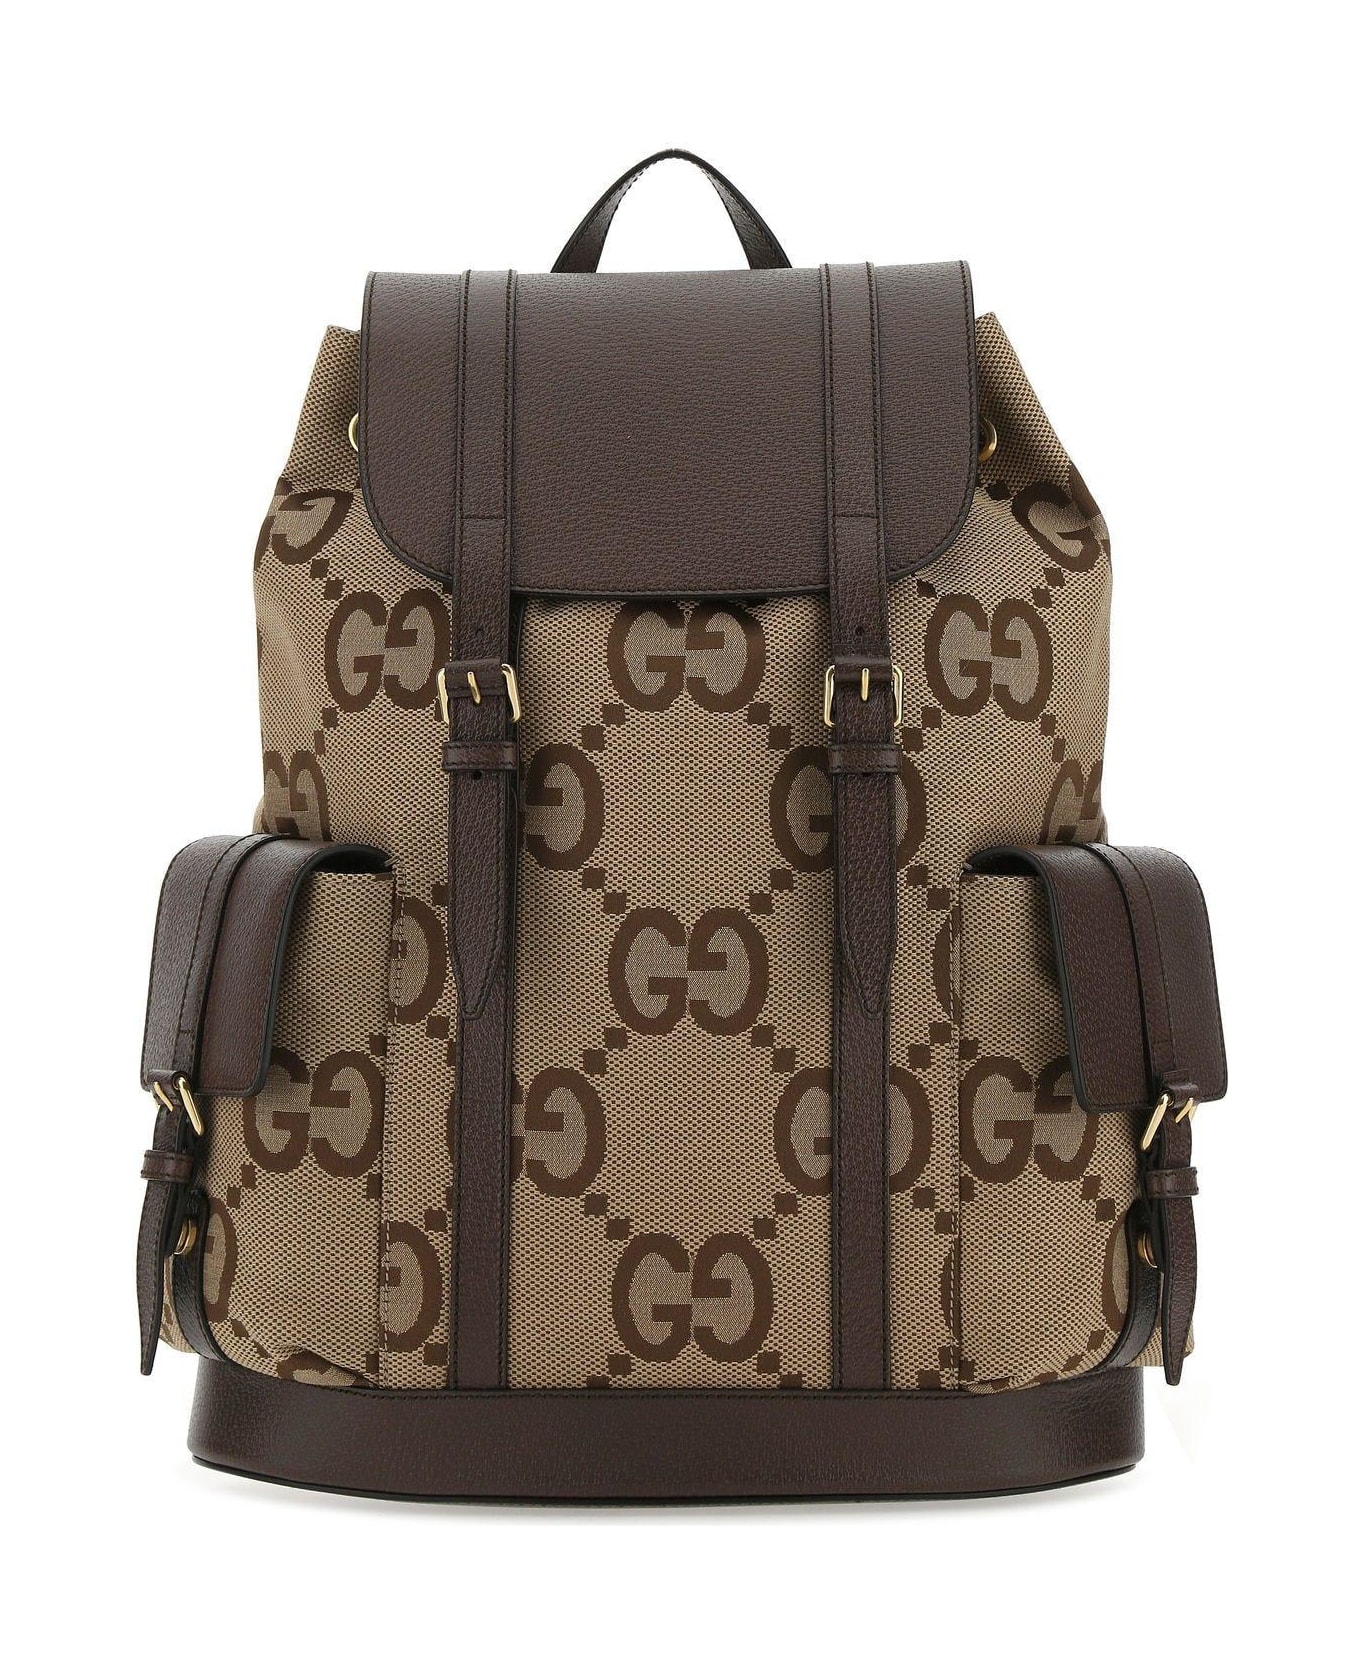 Gucci Multicolor Jumbo Gg Fabric And Leather Backpack - Beige バックパック